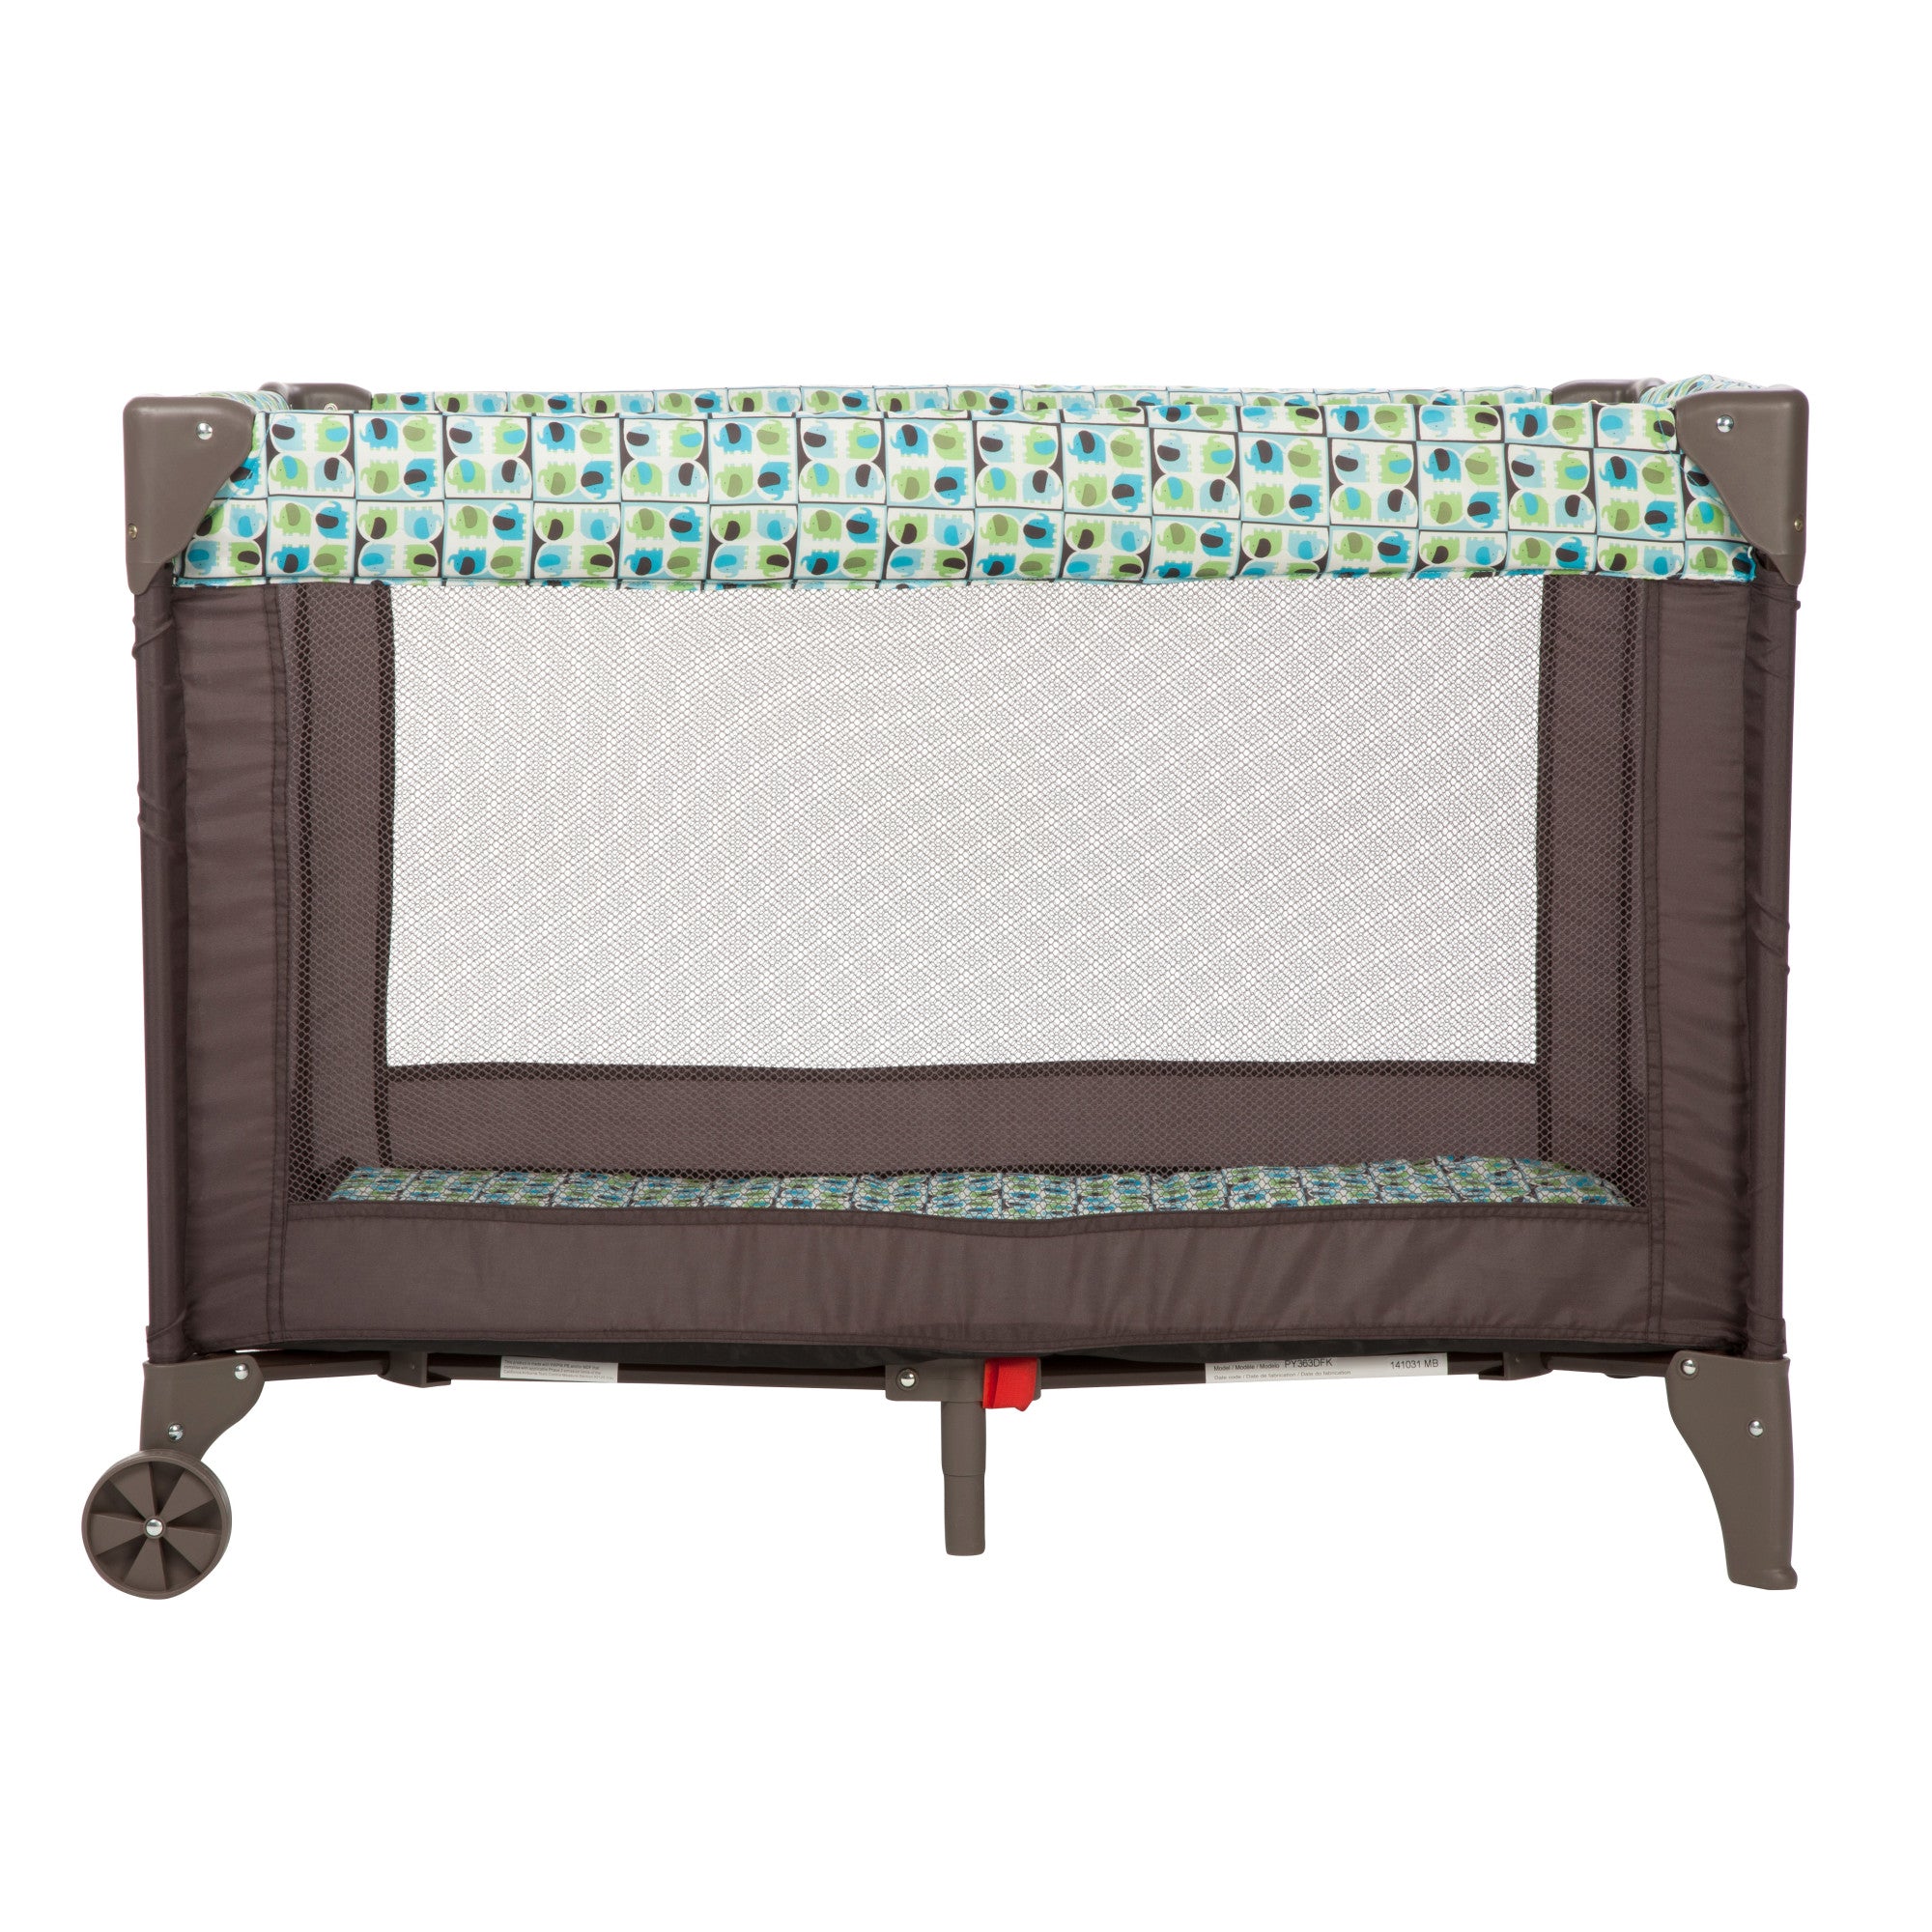 Cosco Funsport Portable Compact Baby Play Yard Elephant Squares